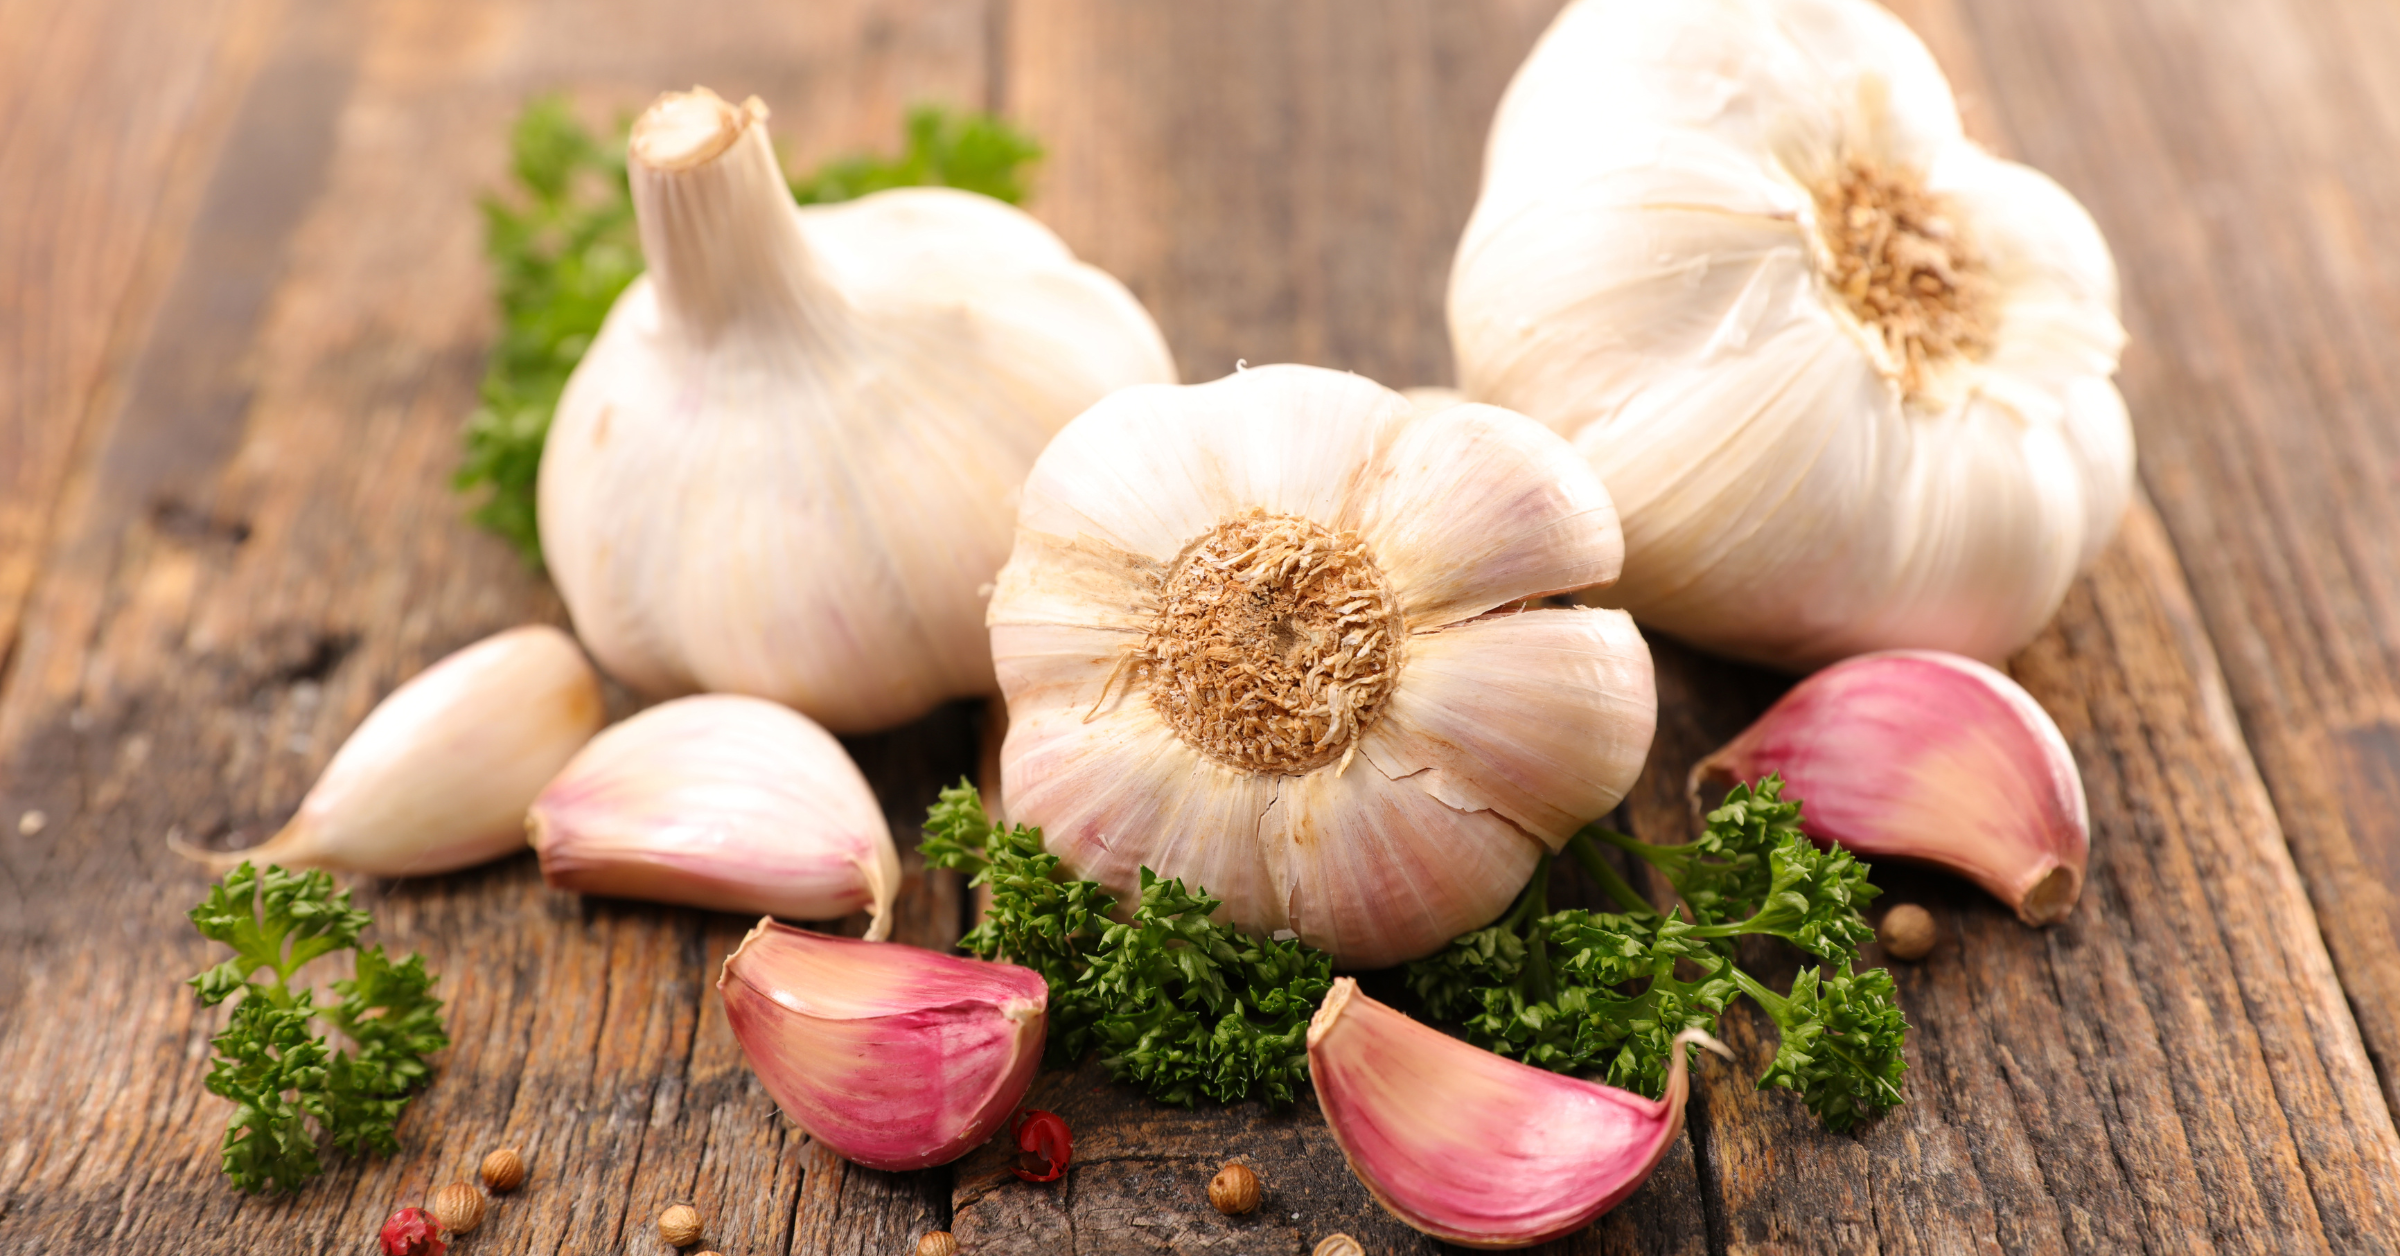 Uncover the compelling reasons to incorporate garlic into your diet regularly, supported by scientific research, and explore the myriad health benefits this versatile ingredient offers for overall well-being.